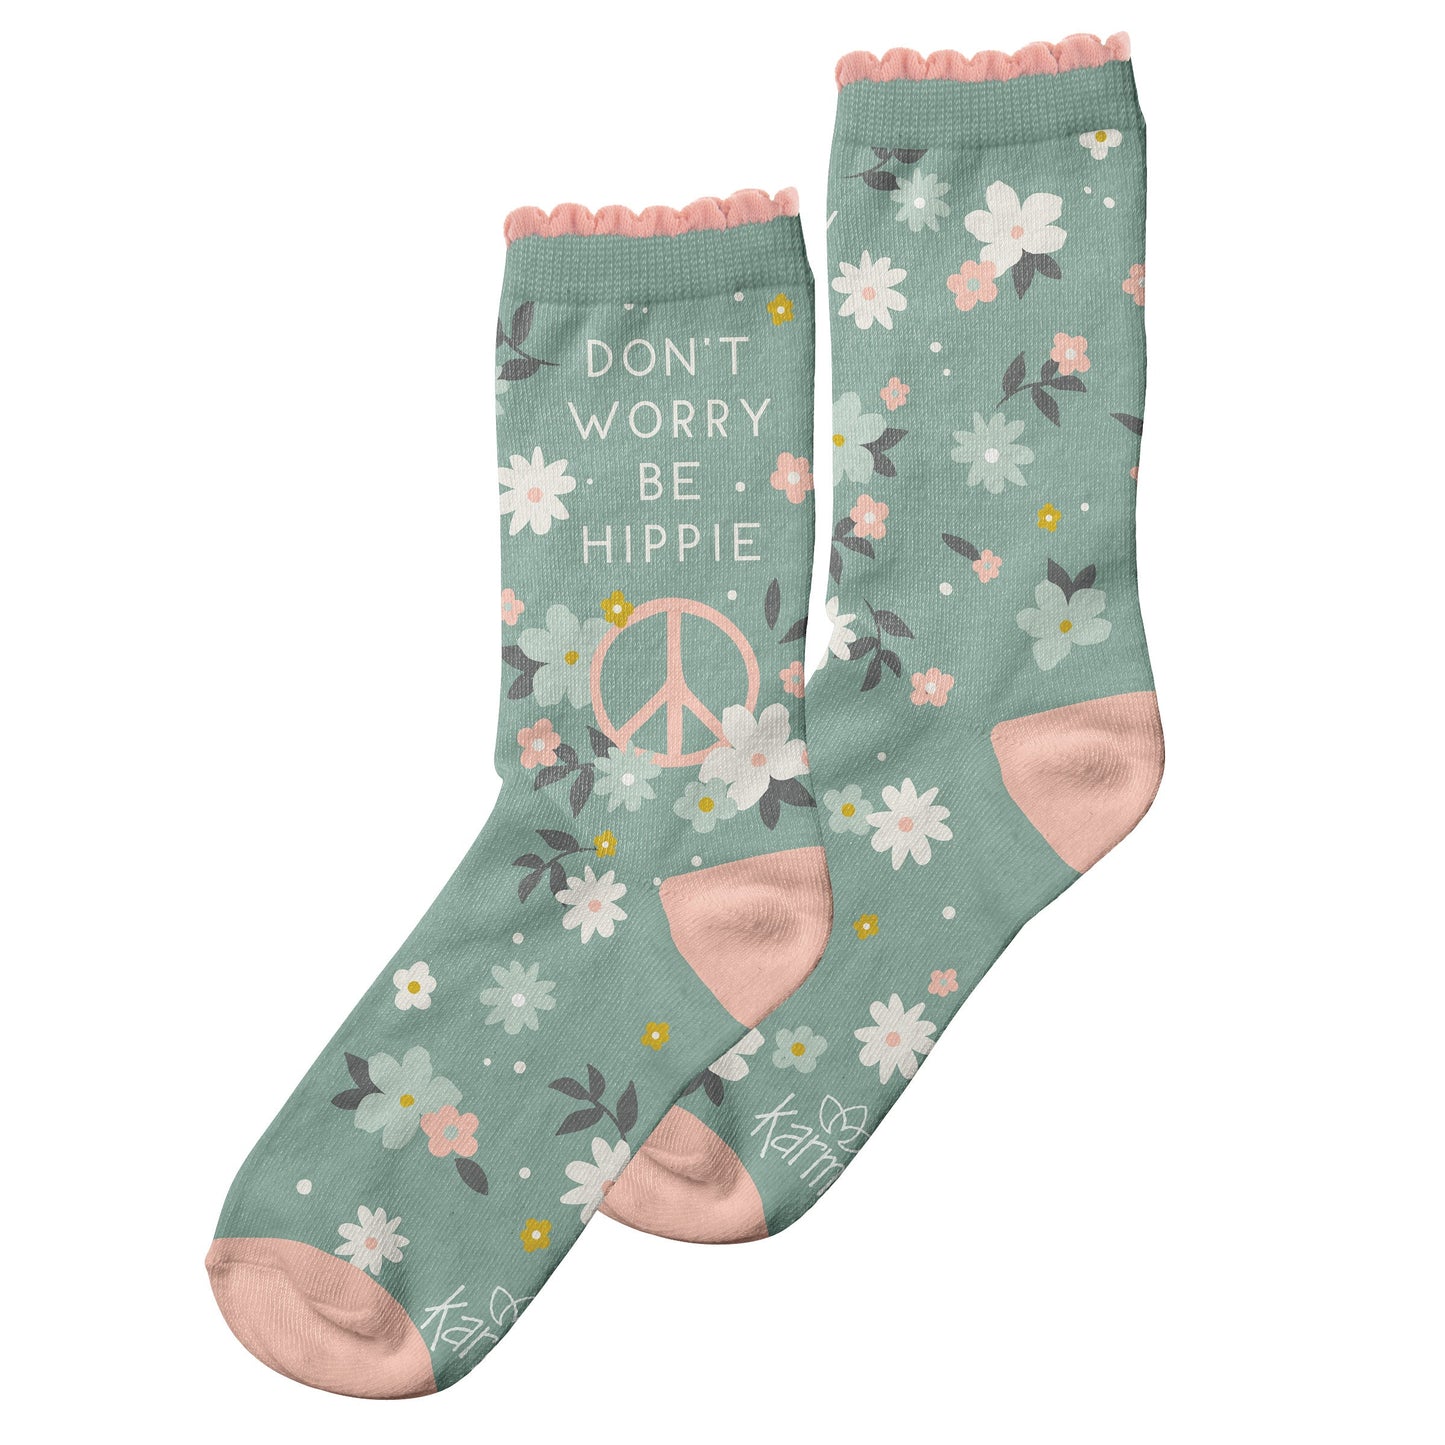 light green socks with floral patter, peace sign, and "don't worry be hippy" on them.